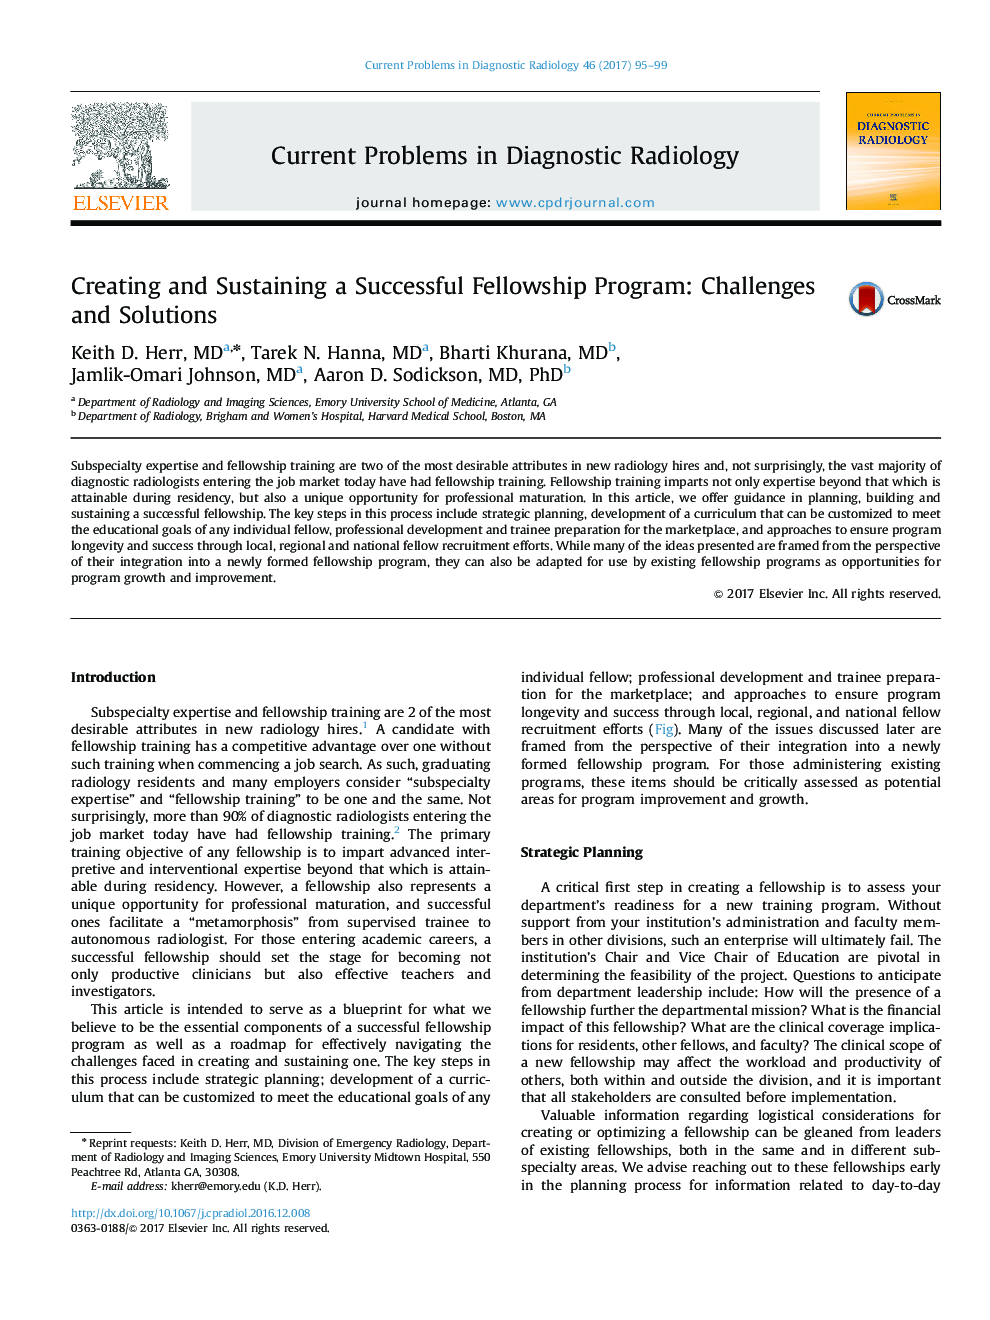 Creating and Sustaining a Successful Fellowship Program: Challenges and Solutions